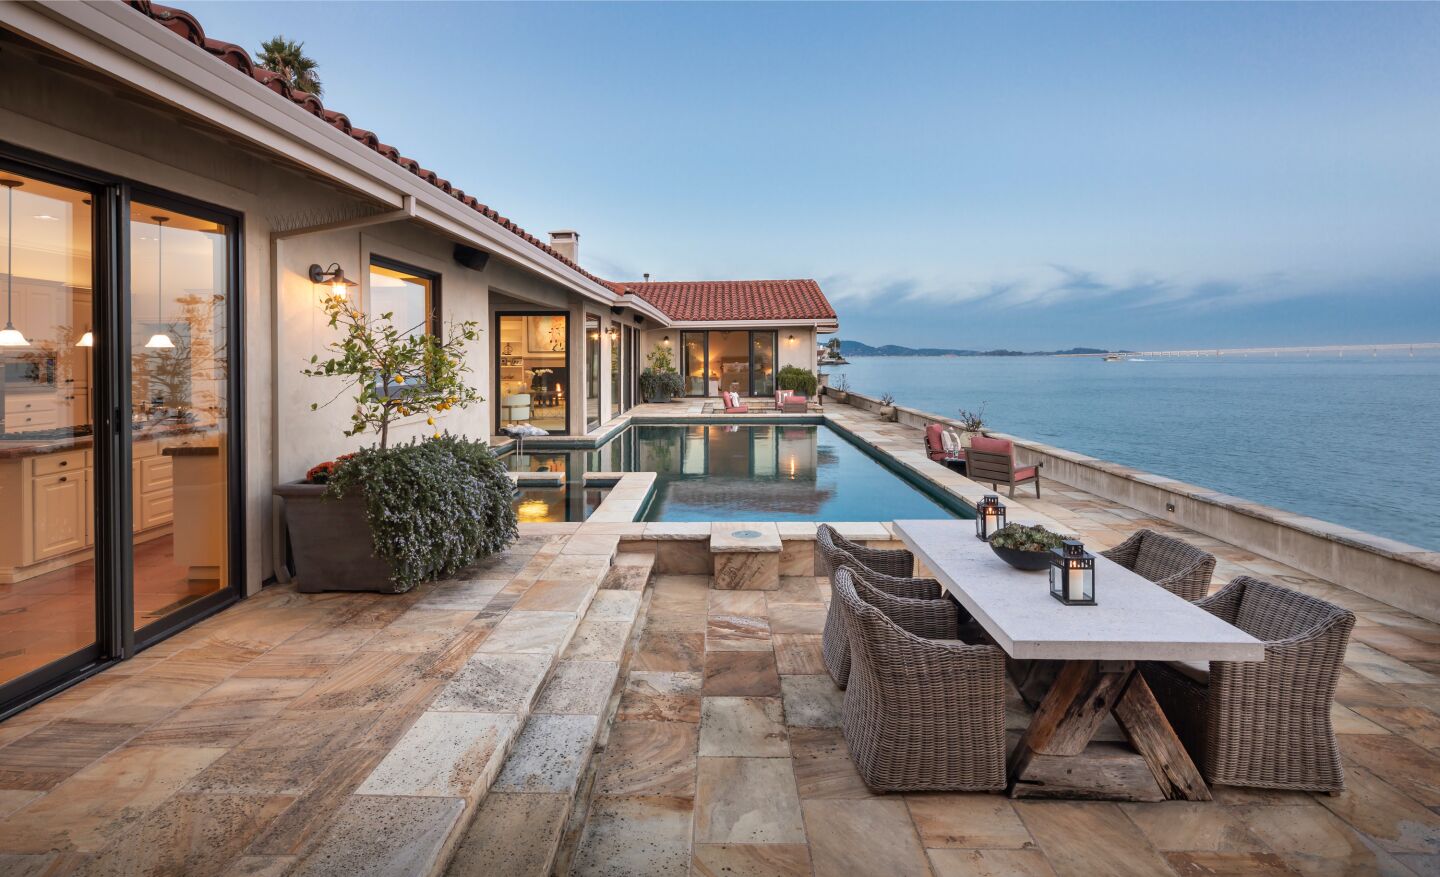 The deck and pool overlooking the bay.